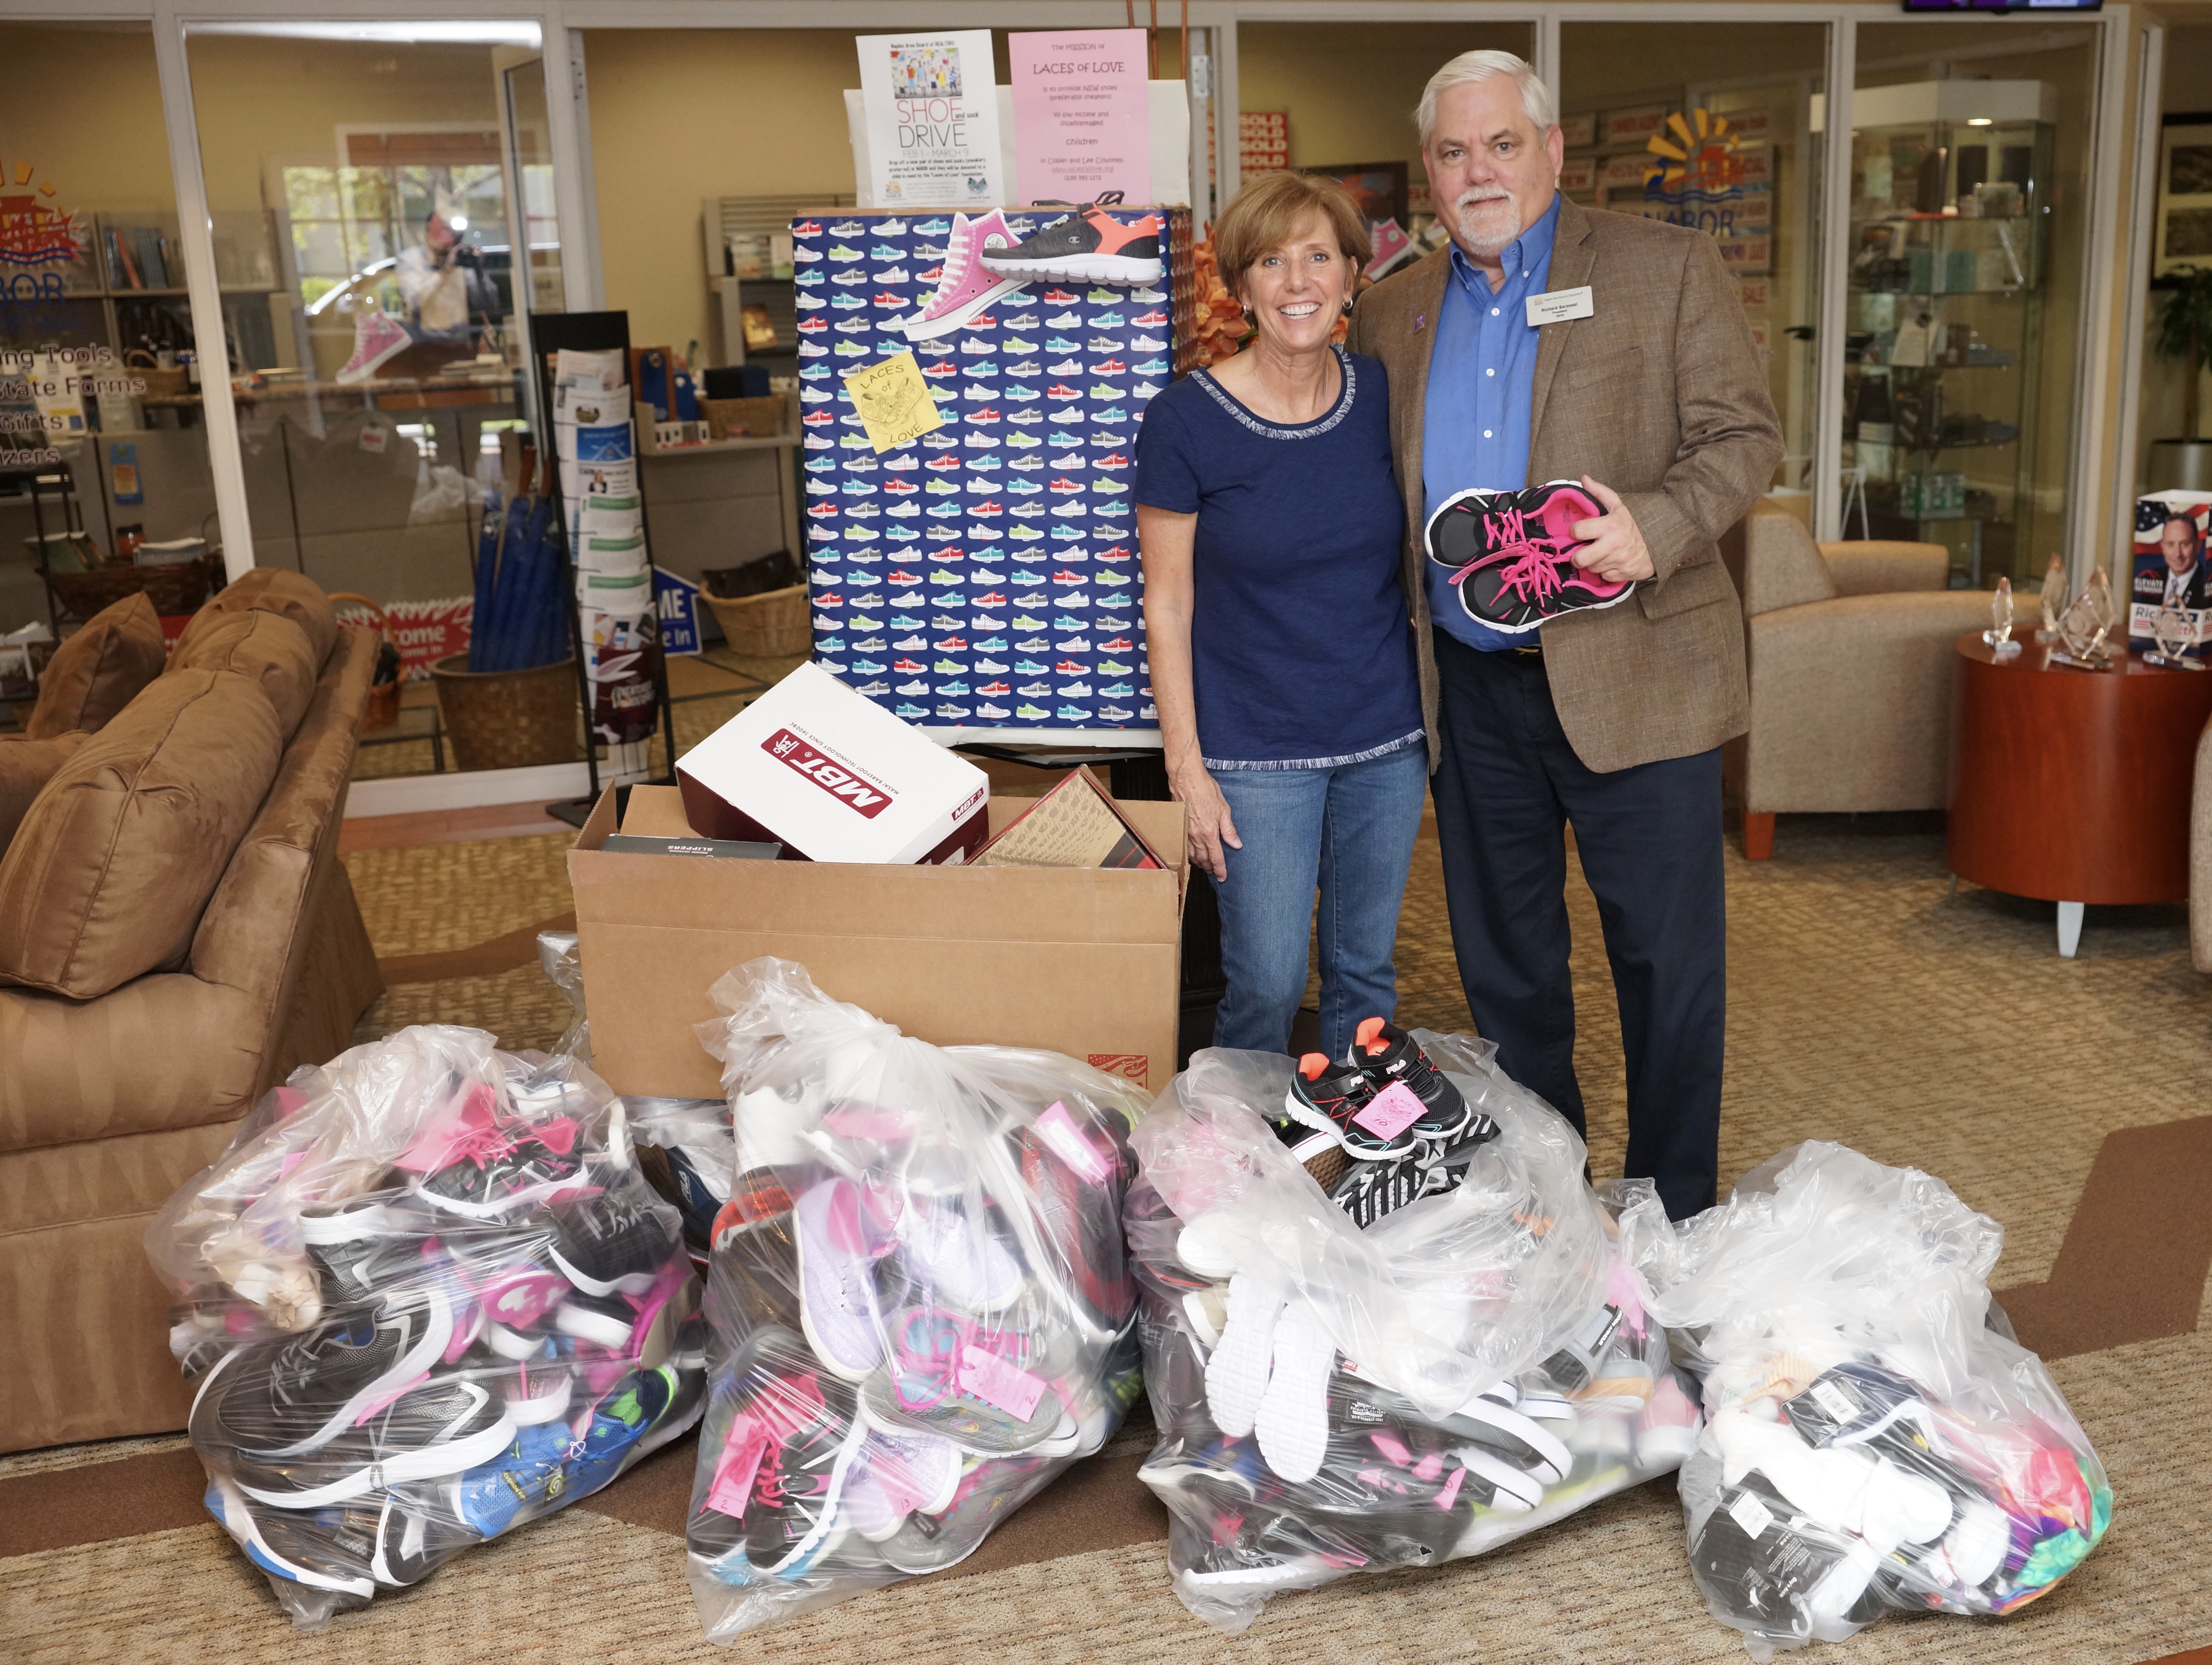 People standing in front of shoes collected for the Shoe Drive